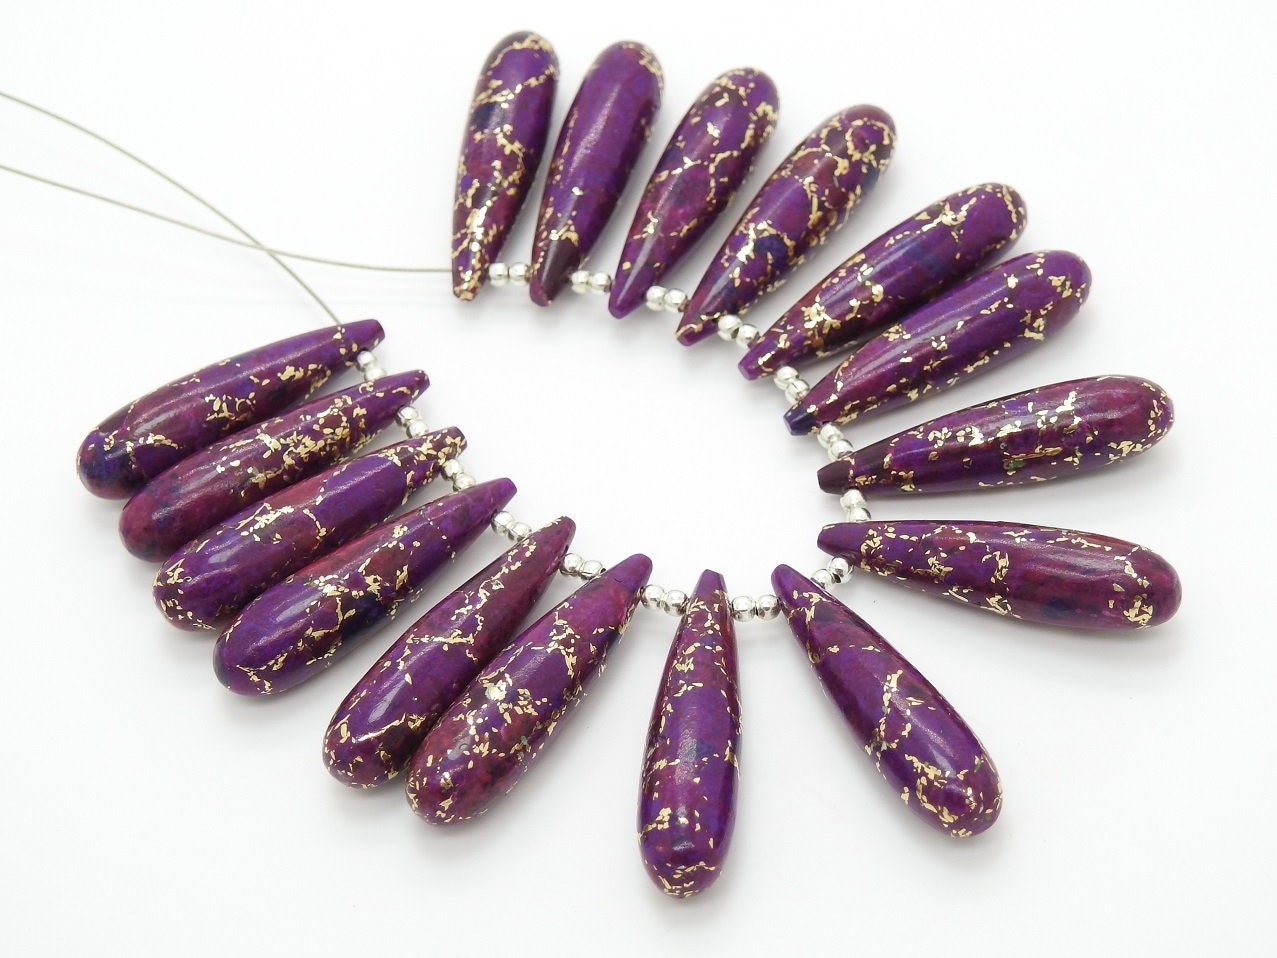 35MM Long Pair,Purple Copper Turquoise Smooth Elongated Drop,Teardrop,Loose Stone,For Making Earrings,Wholesale Price New Arrival PME-CY3 | Save 33% - Rajasthan Living 16